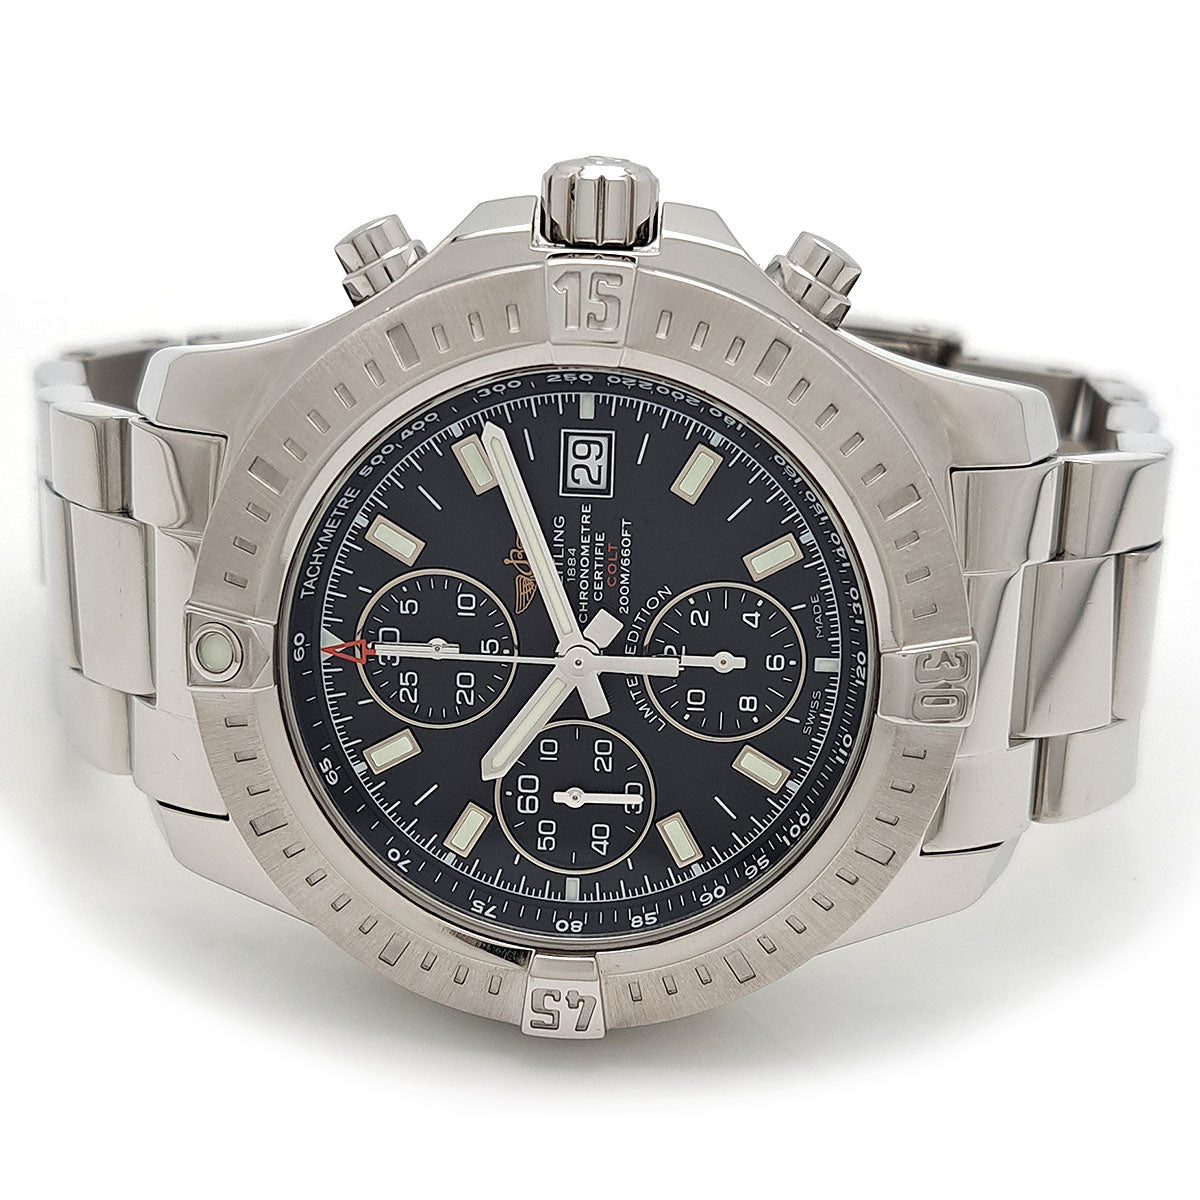 BREITLING Colt Chronograph Automatic Japan Exclusive A13388 Stainless Steel Automatic Men's Watch A13388